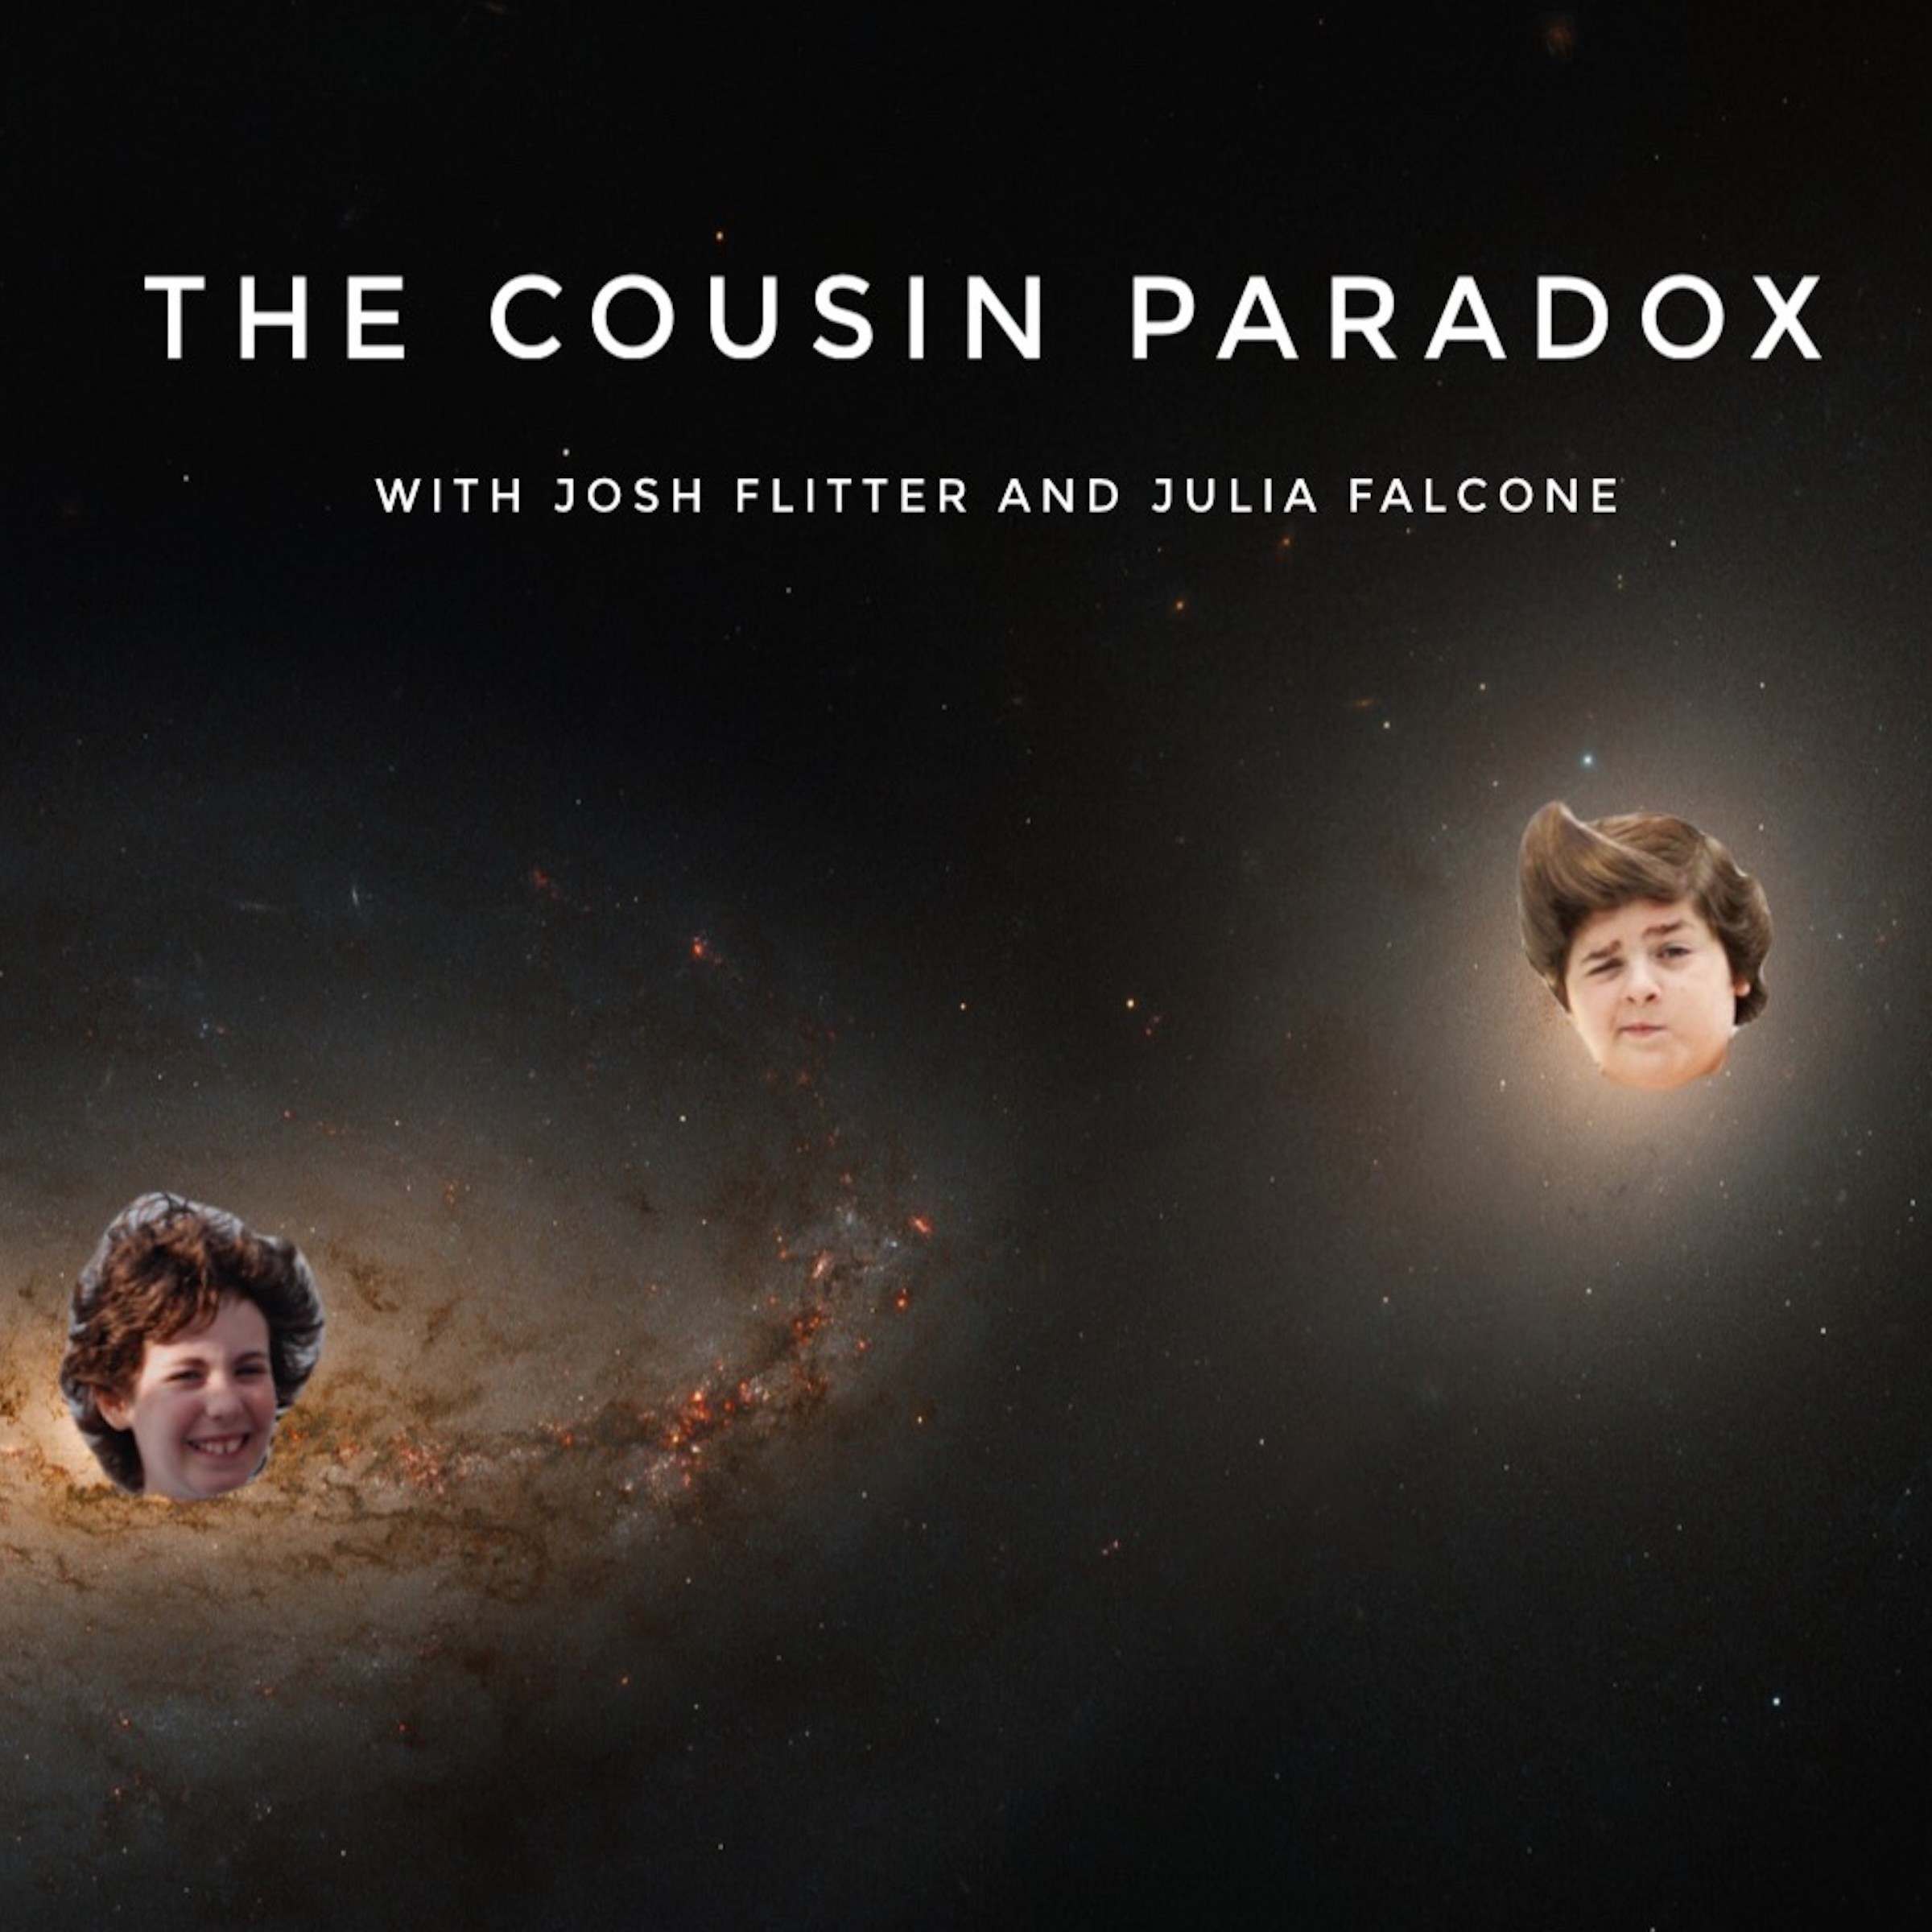 The Cousin Paradox Image